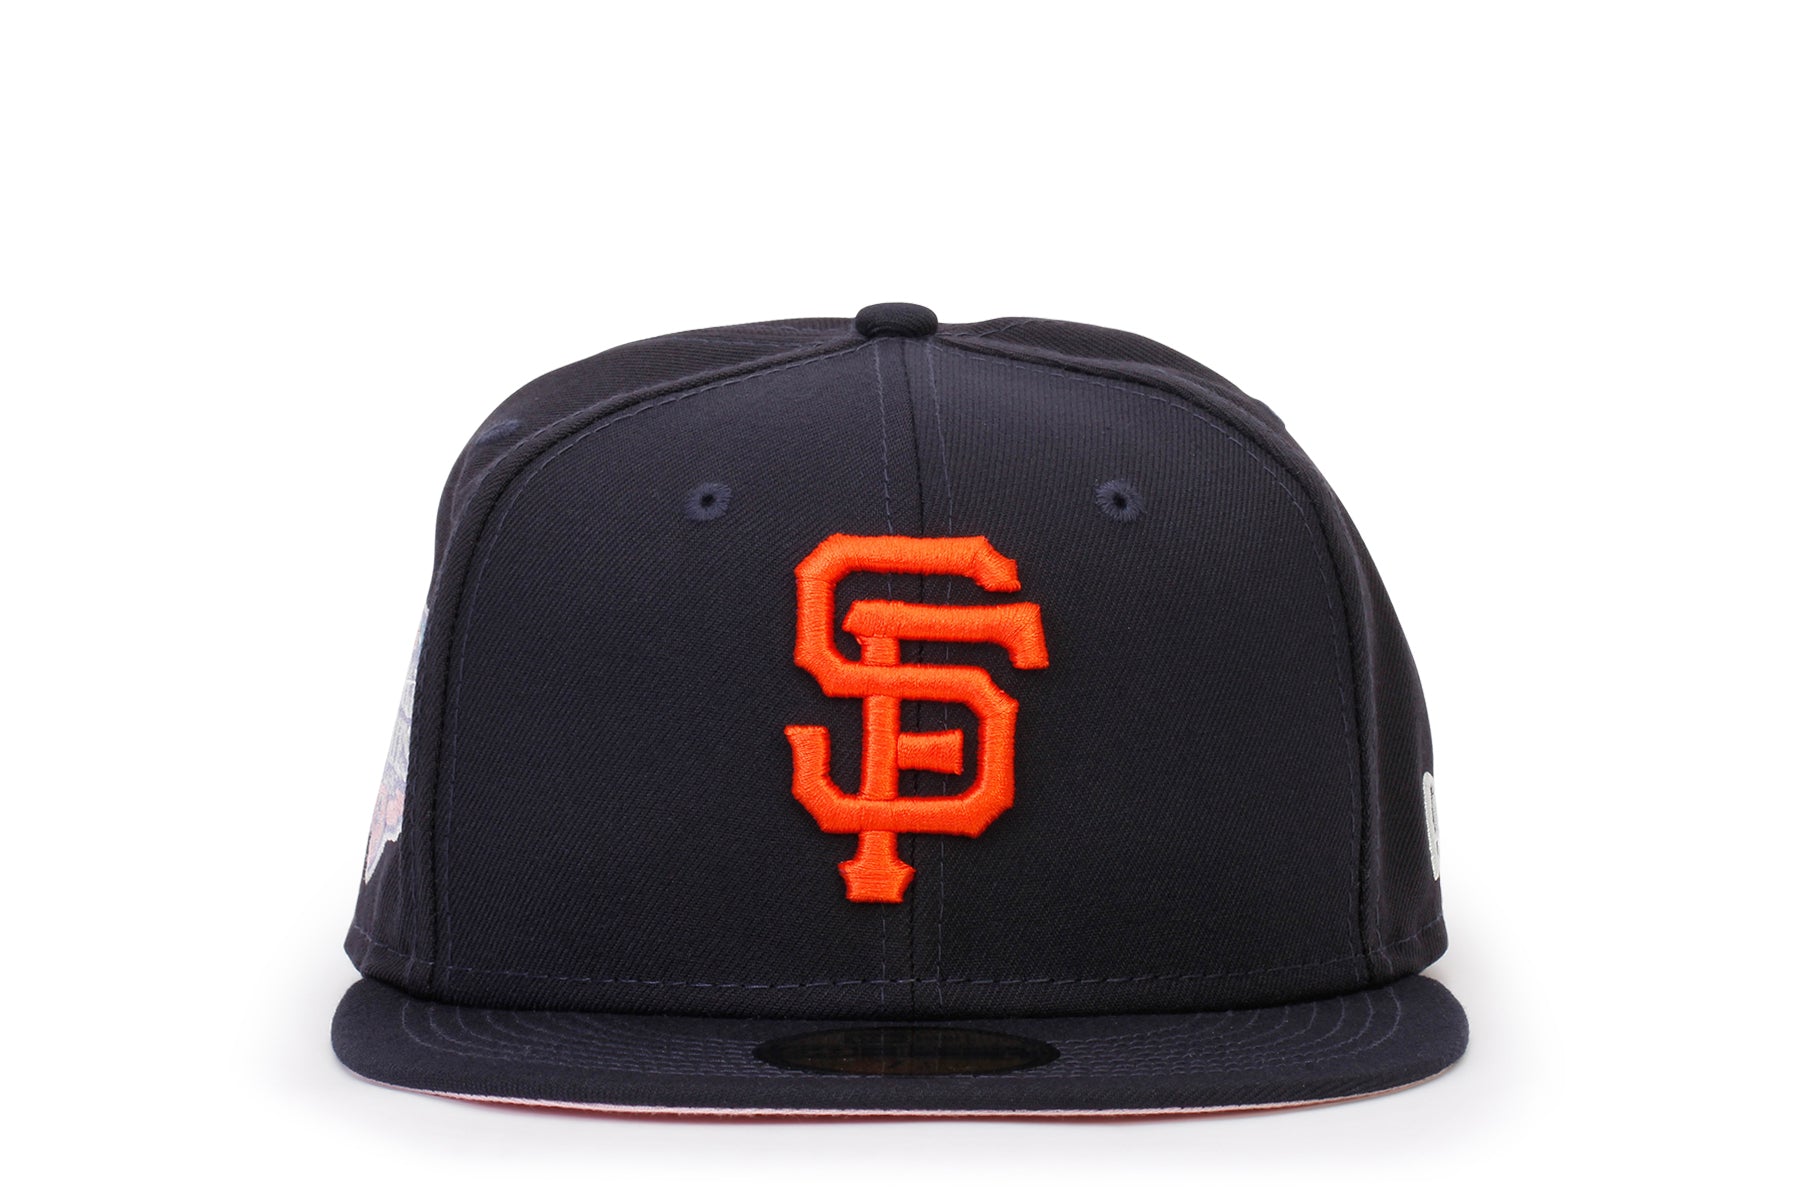 Men's San Francisco Giants New Era Navy White Logo 59FIFTY Fitted Hat